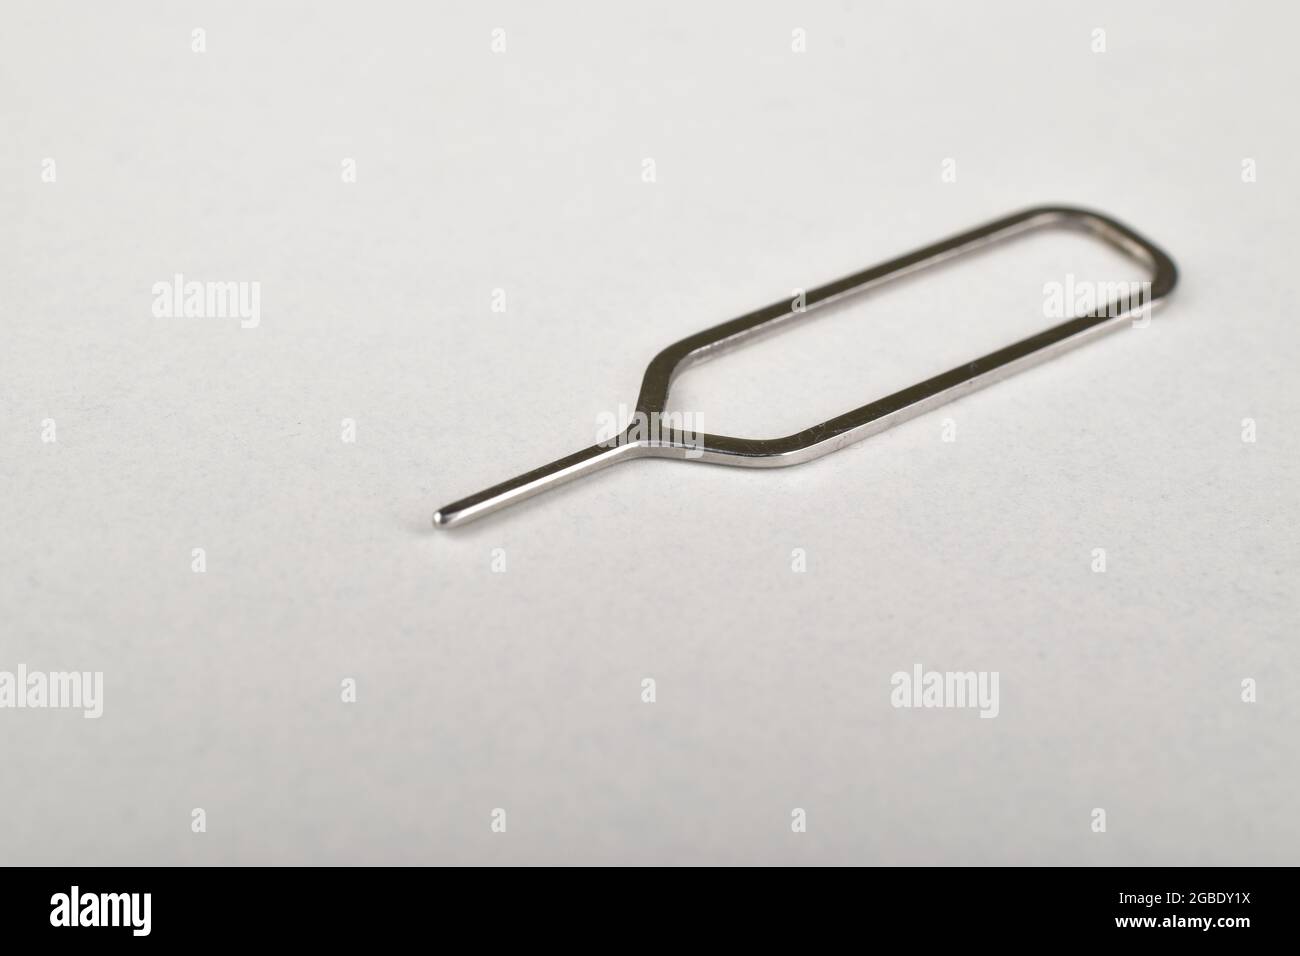 Sim Ejector Pin On White Background Stock Photo